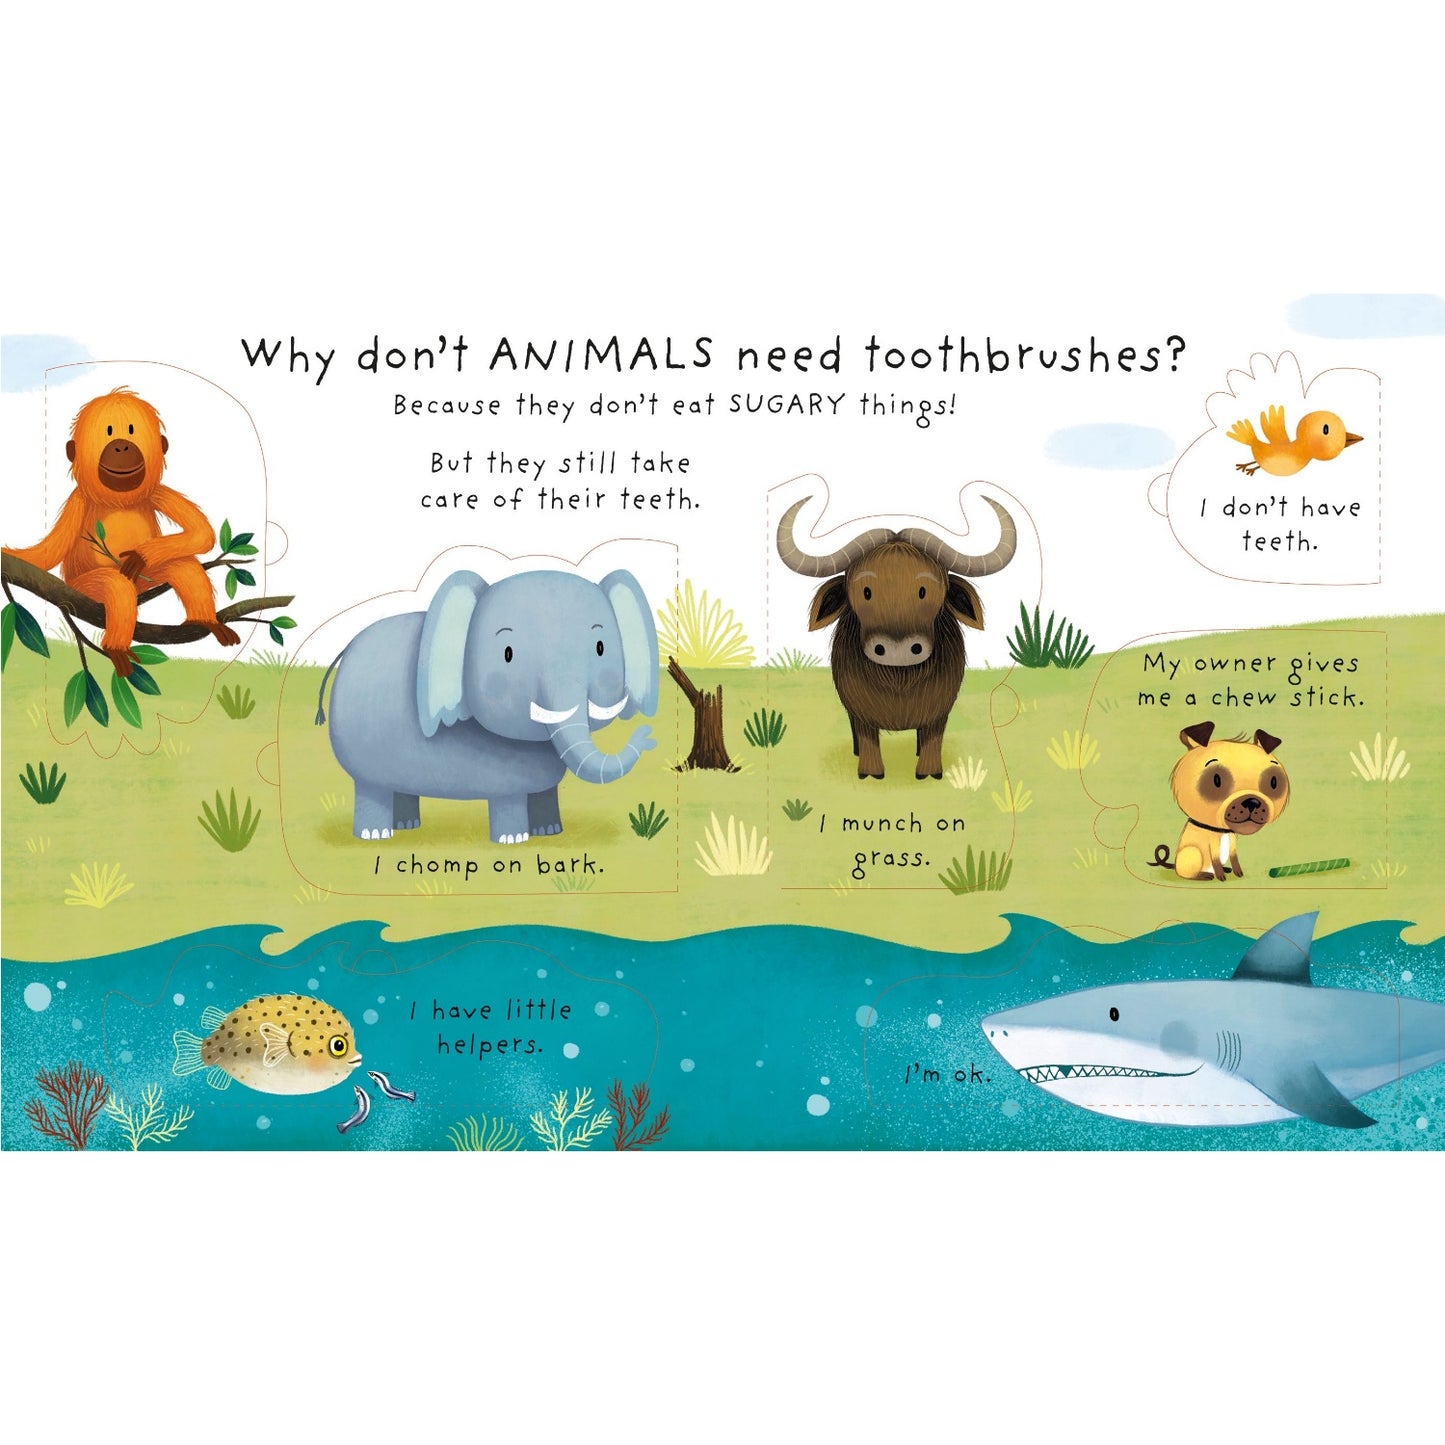 Why Should I Brush My Teeth? - Very First Questions & Answers Lift-the-Flap Board Book